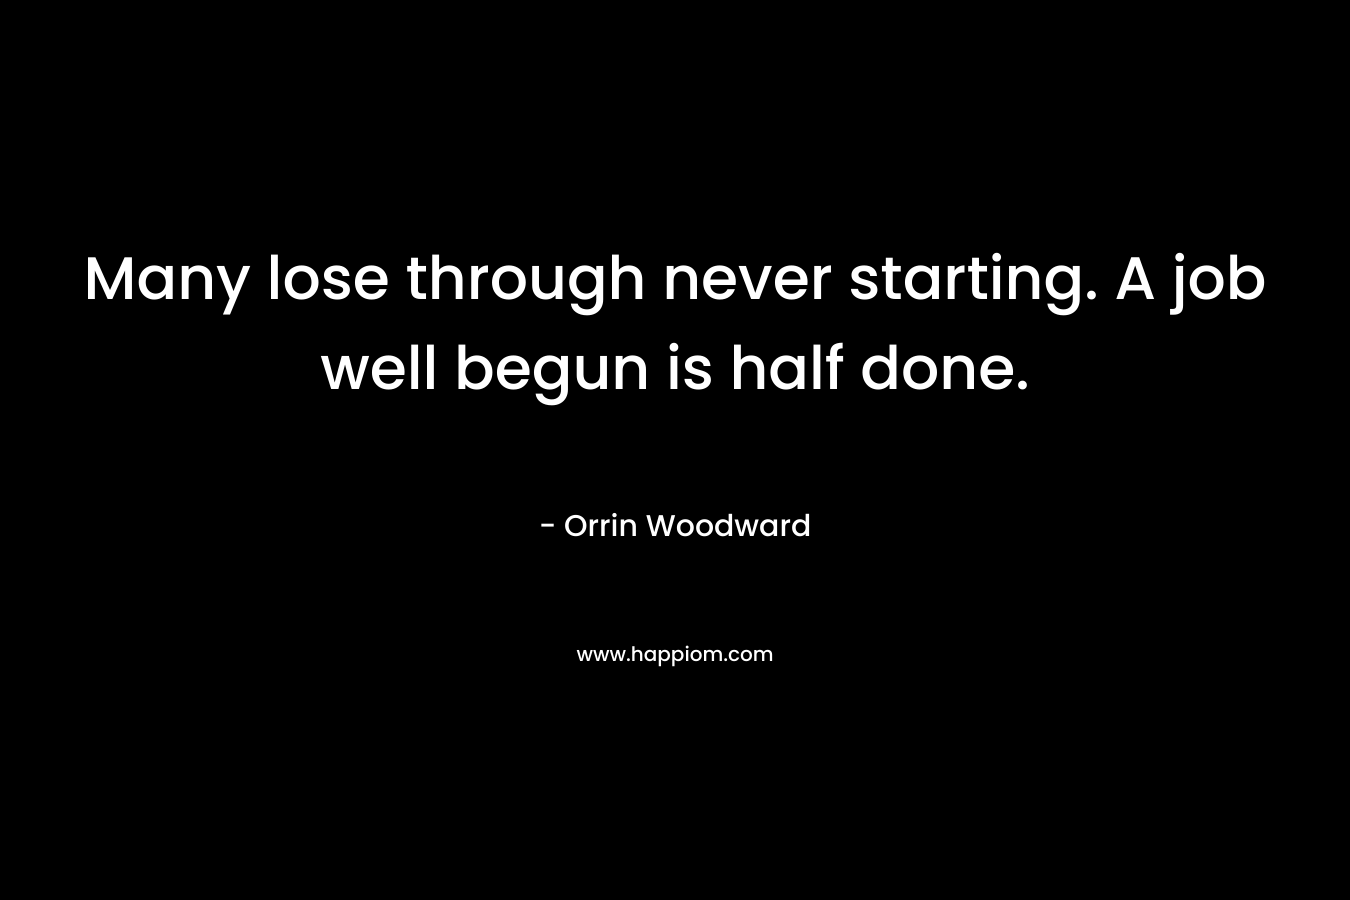 Many lose through never starting. A job well begun is half done.